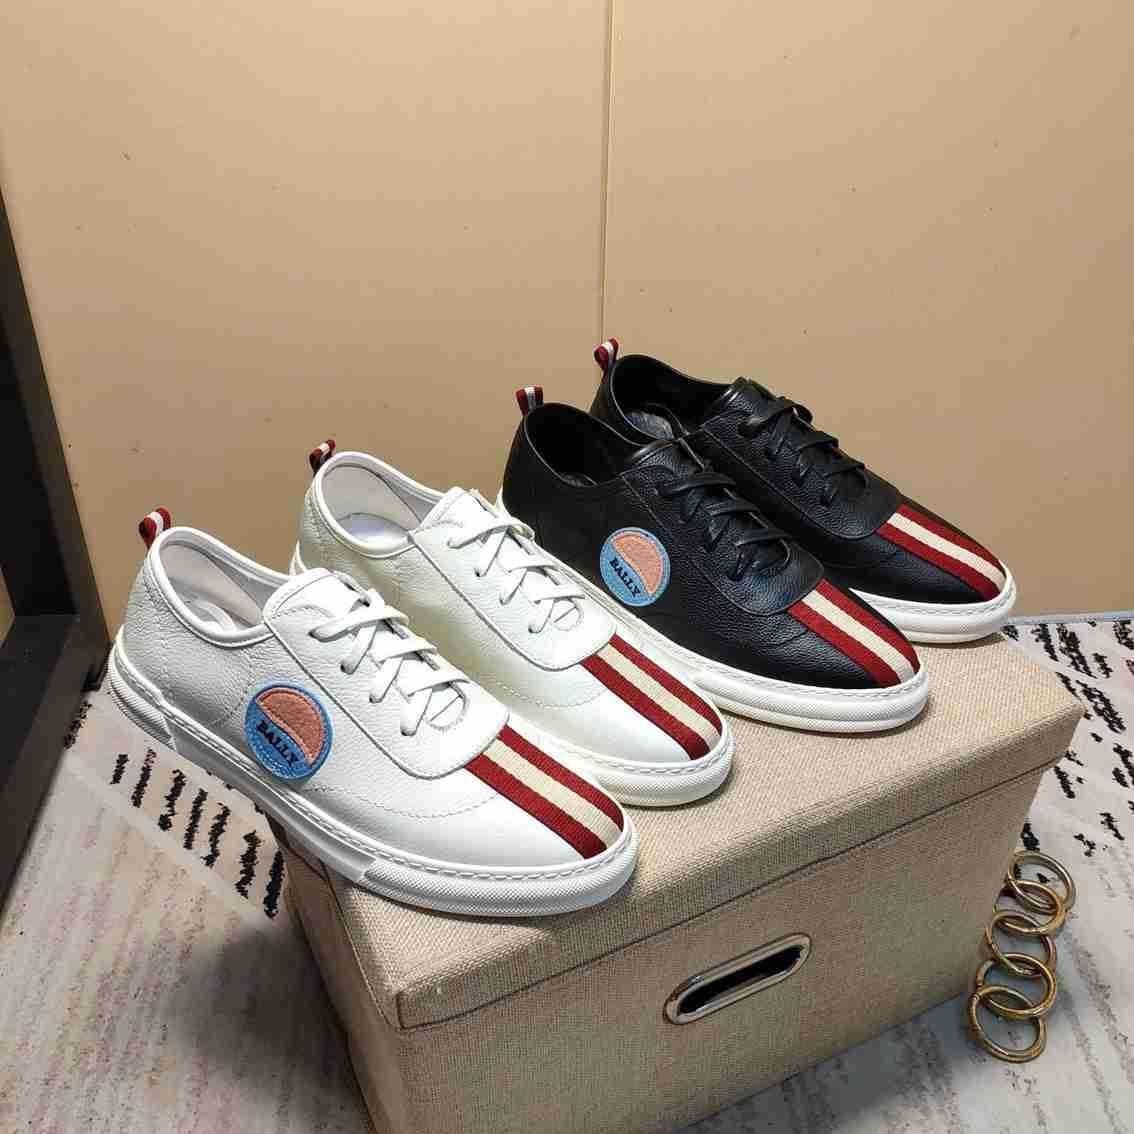 bally sneakers 2019